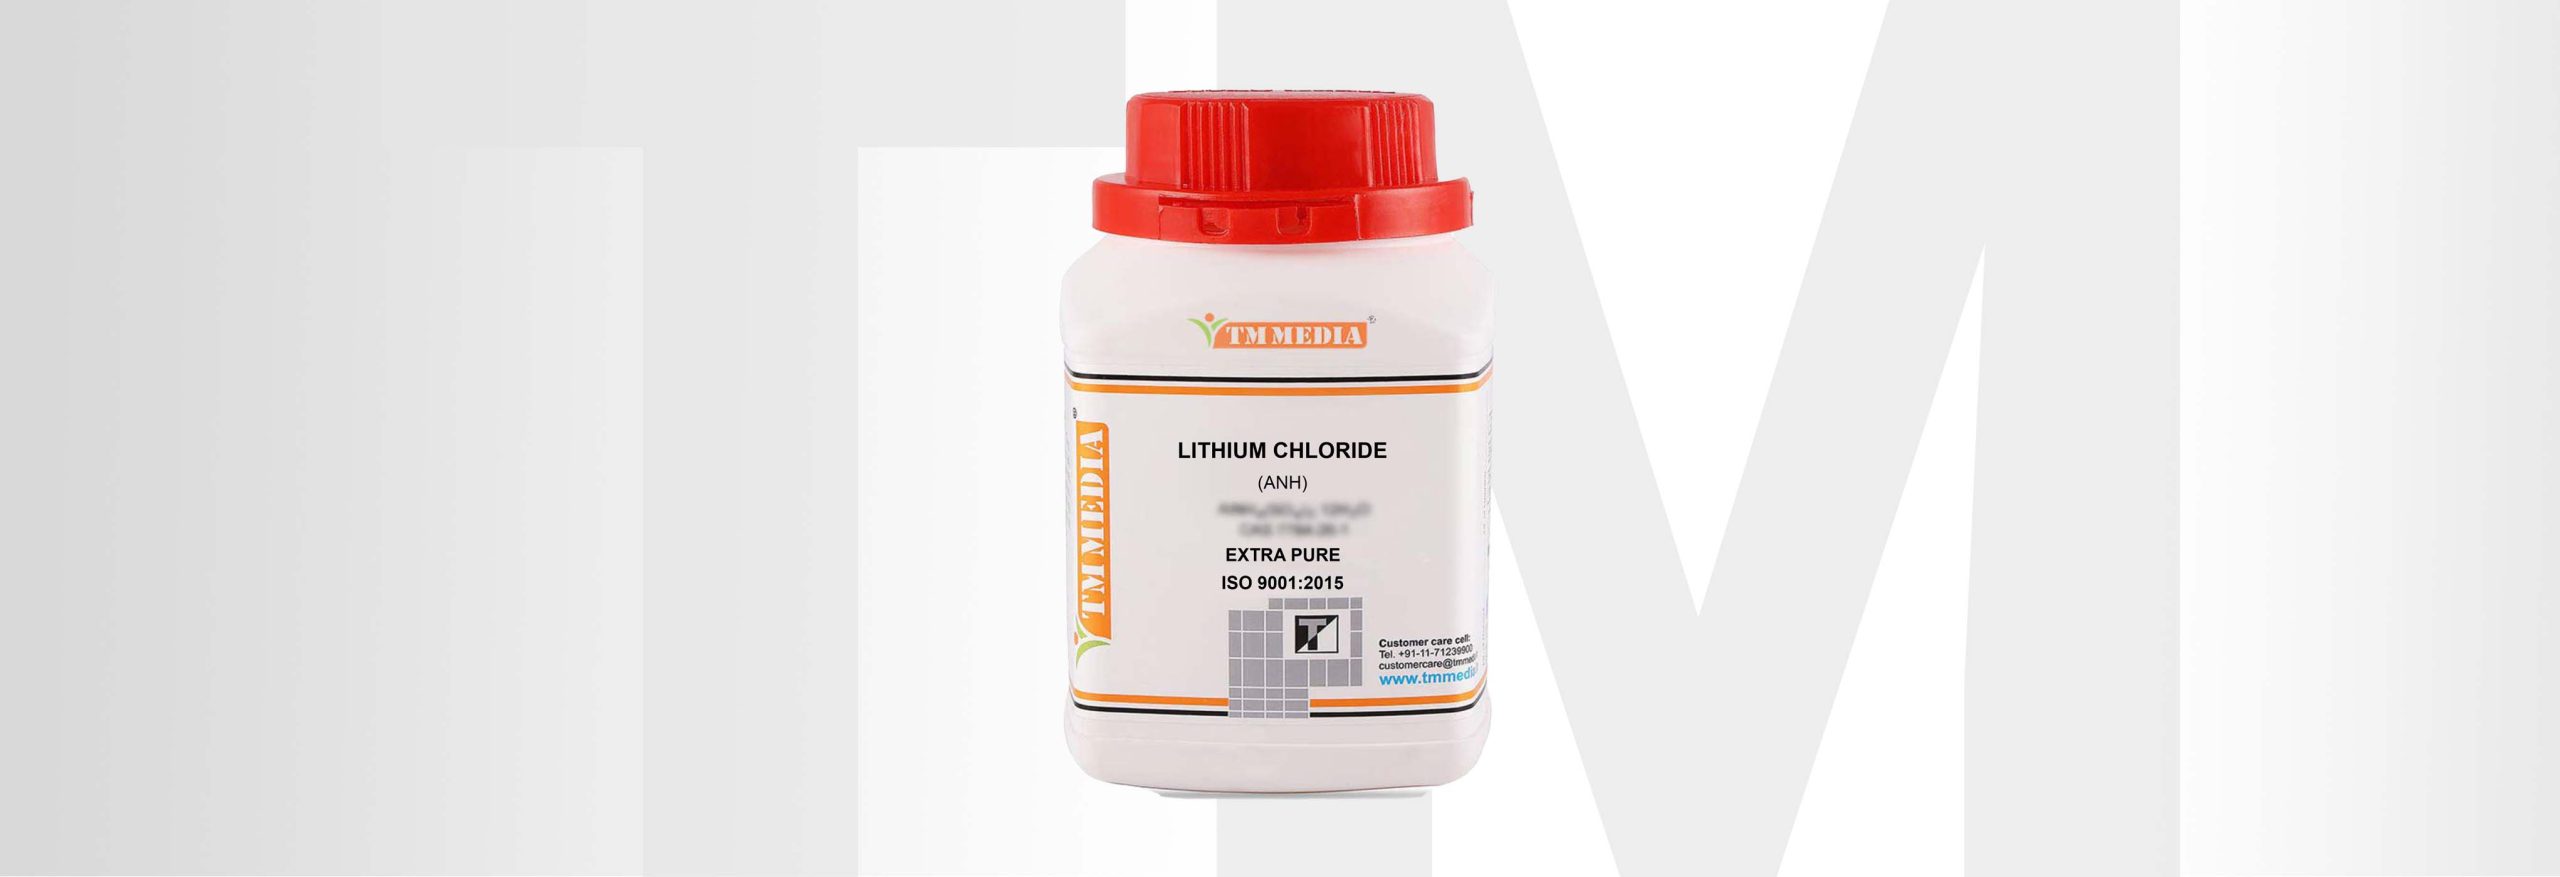 LITHIUM CHLORIDE (ANH), EXTRA PURE – TMMedia